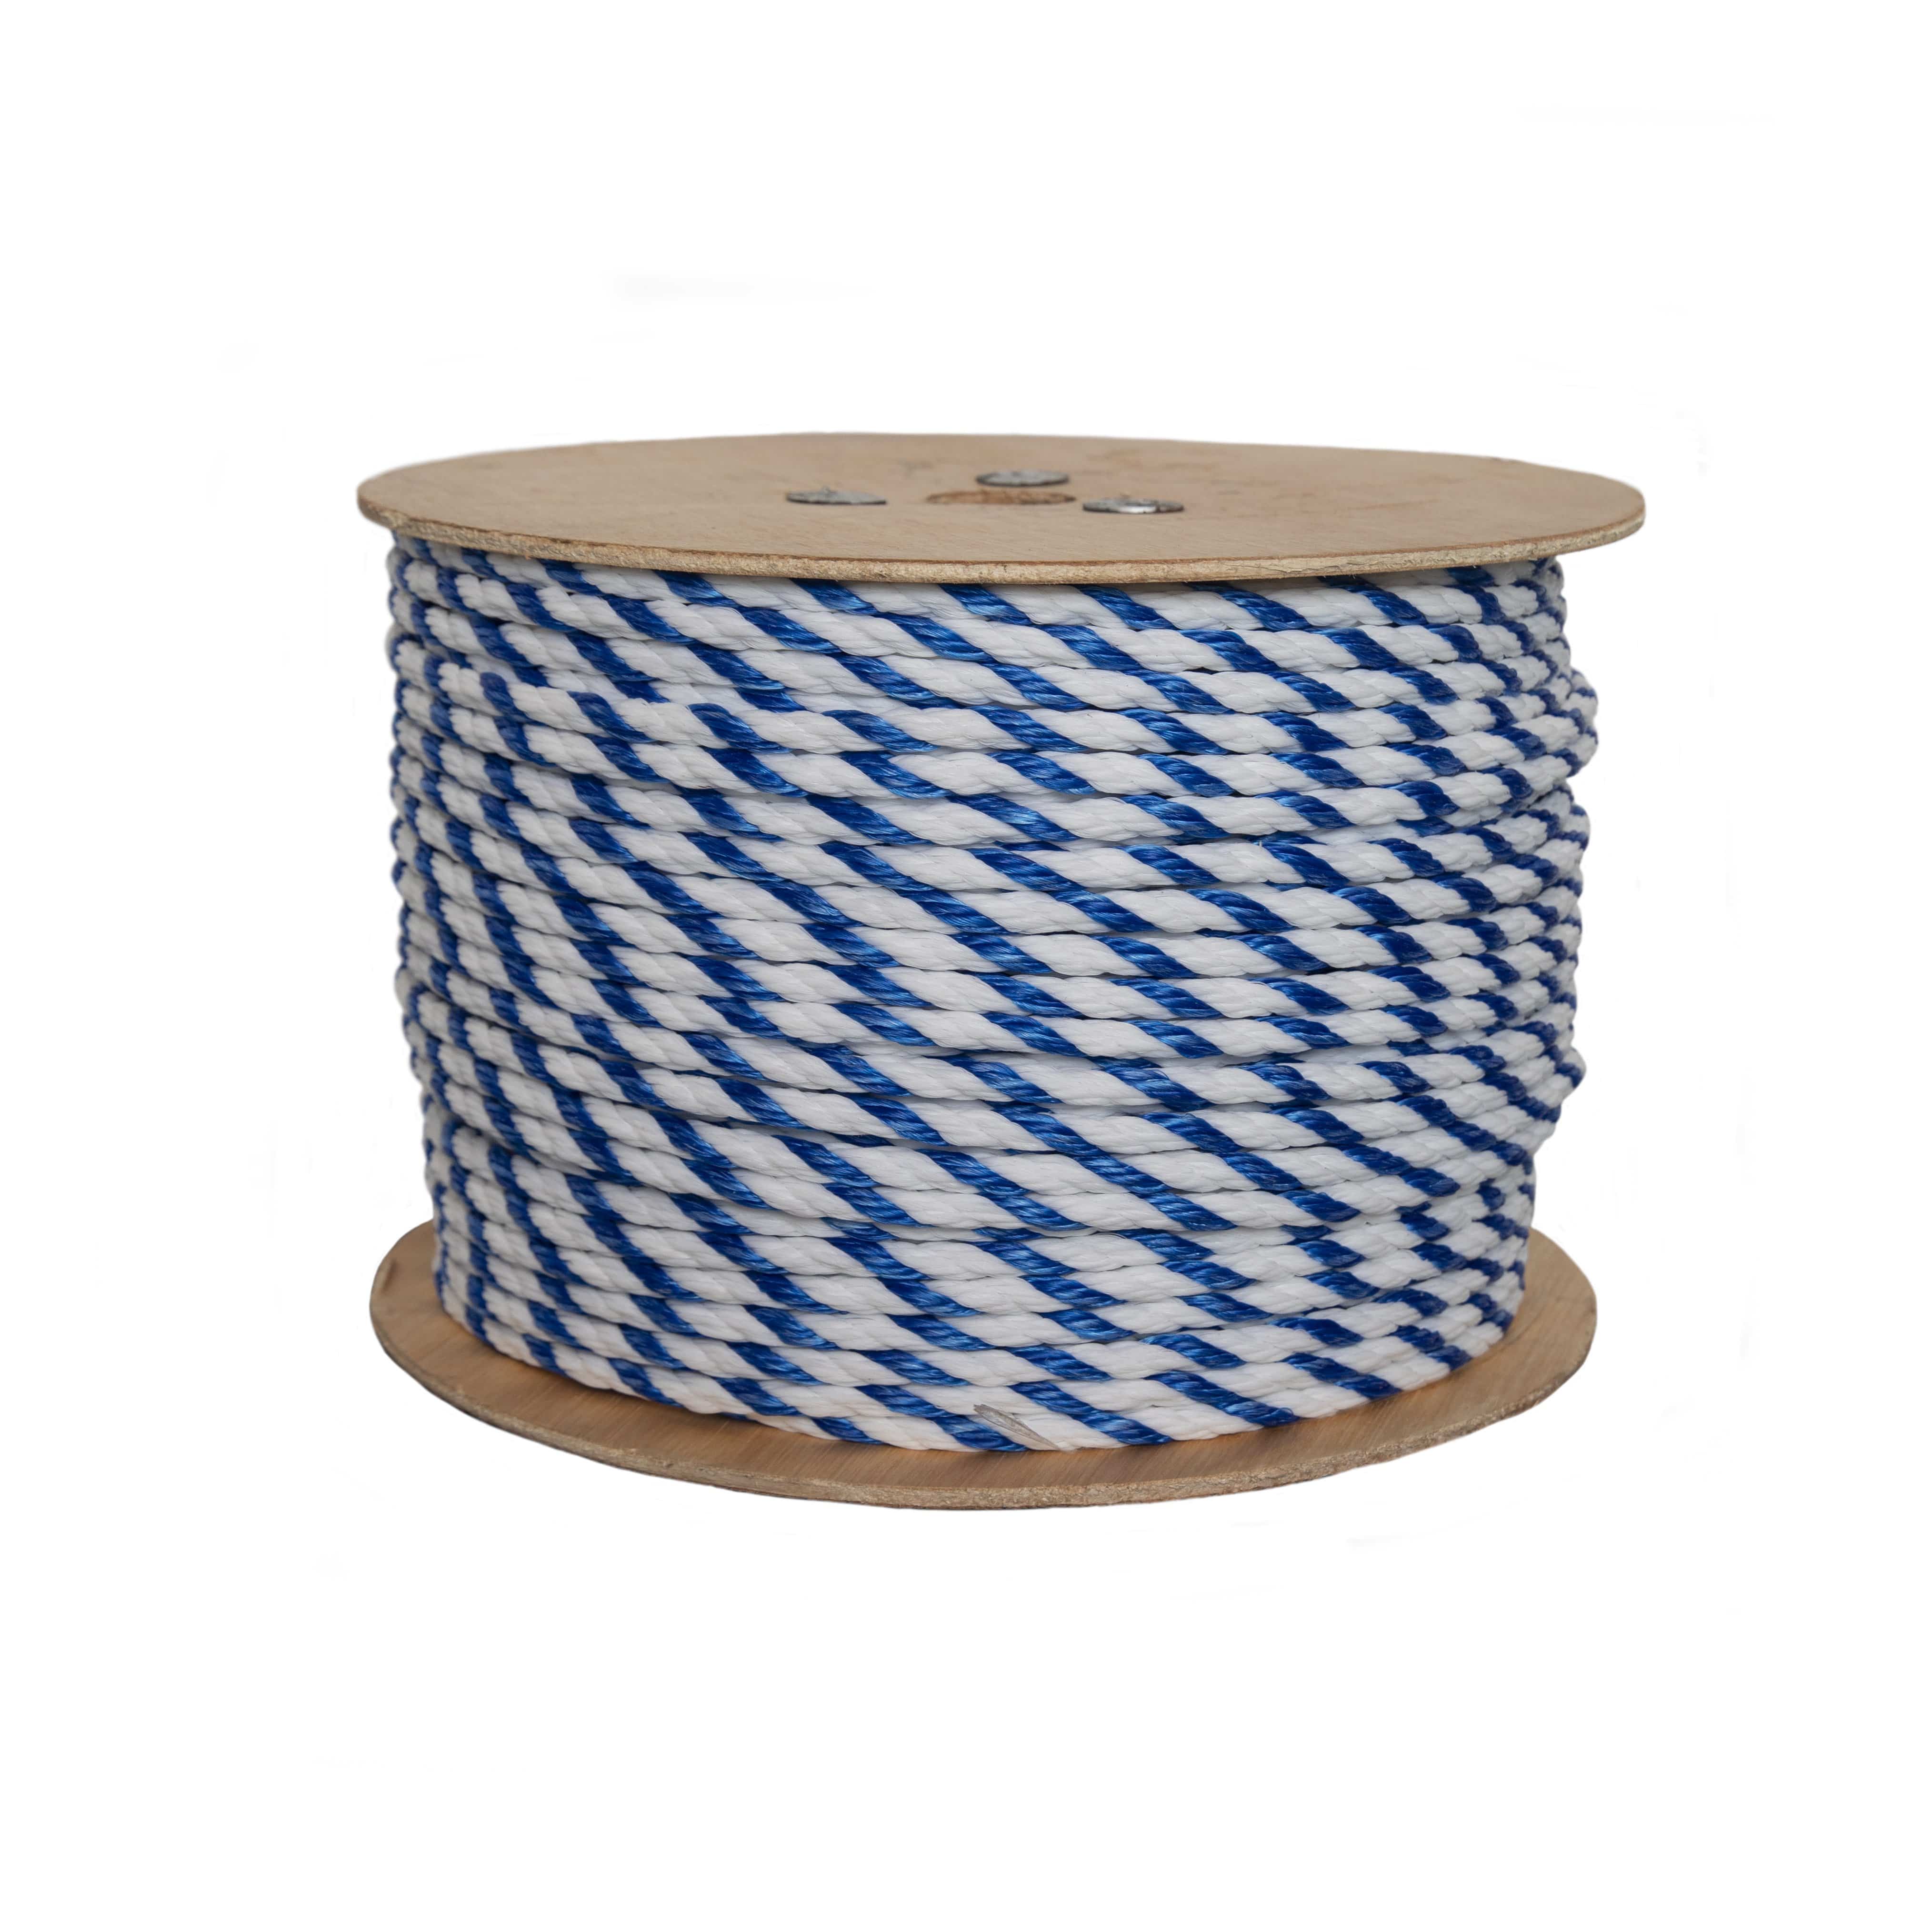 Polypropylene Ropes in Ropes 